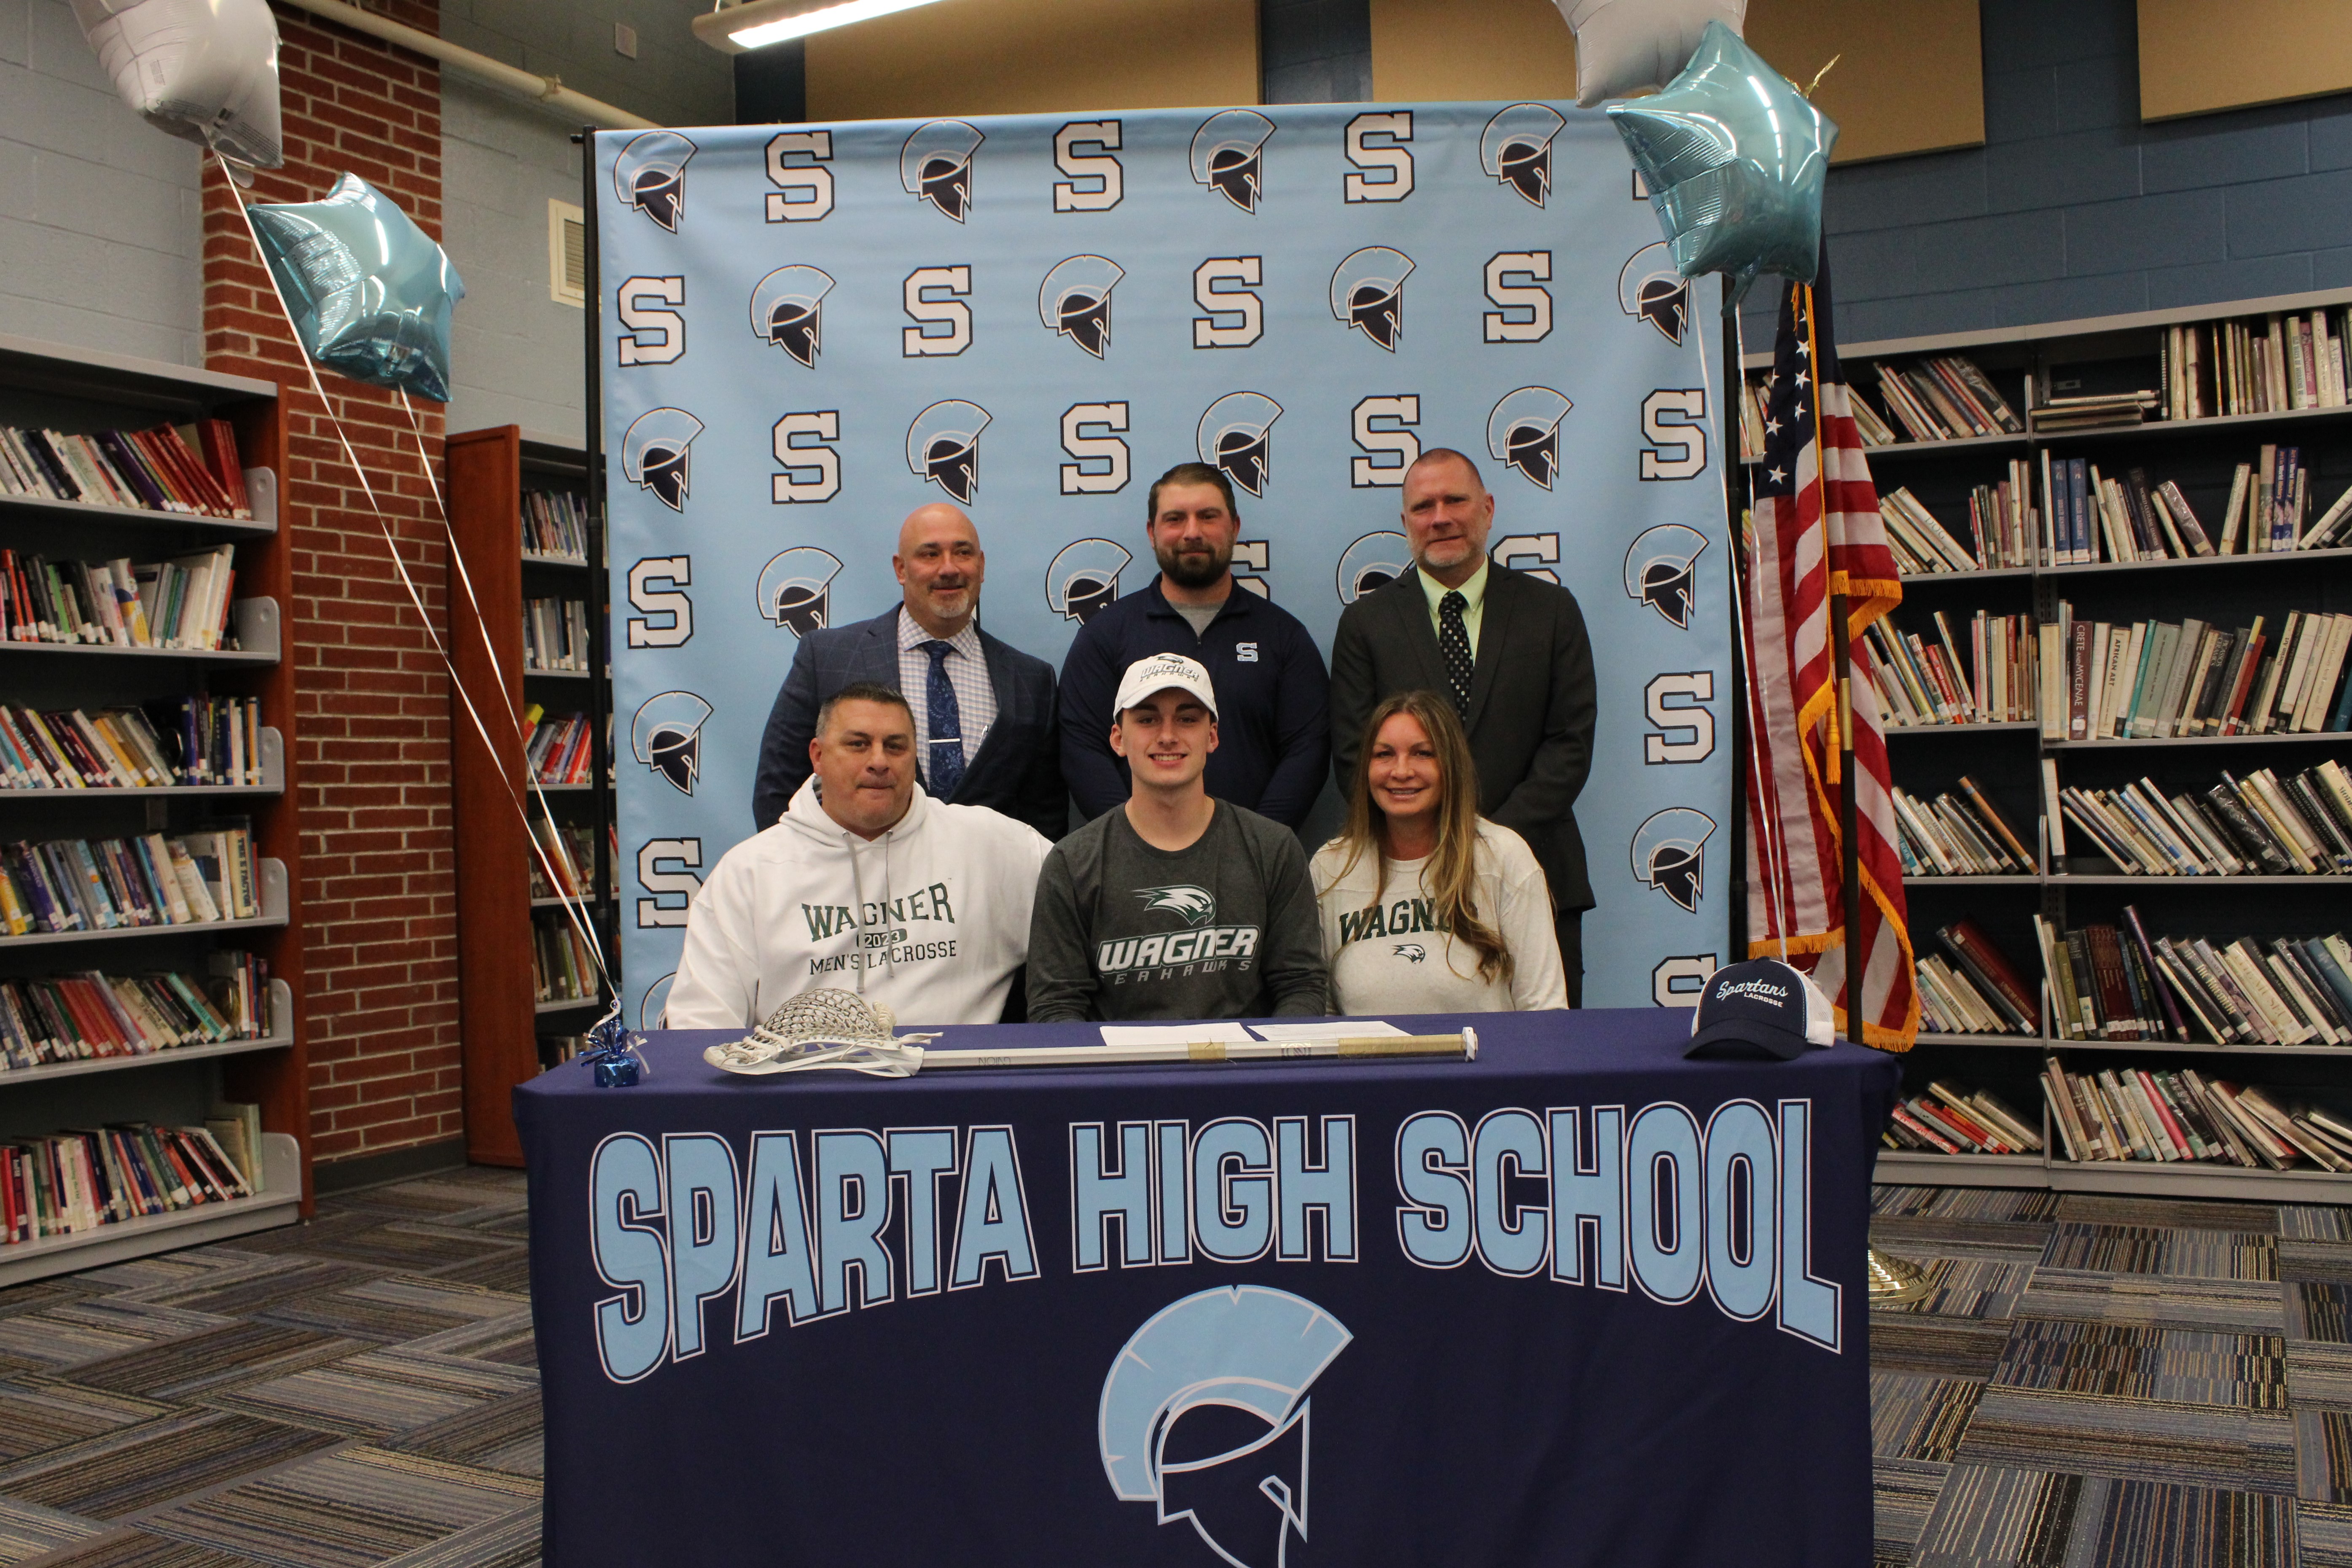 Ryan Rossi will continue his lacrosse career at Wagner College.  Pictured are: Back row: Dr. Ed Lazzara, Principal; Sean Peterson, head coach and Steve Stoner, AD
Front row: Steven Rossi, Ryan Rossi and Donna Rossi